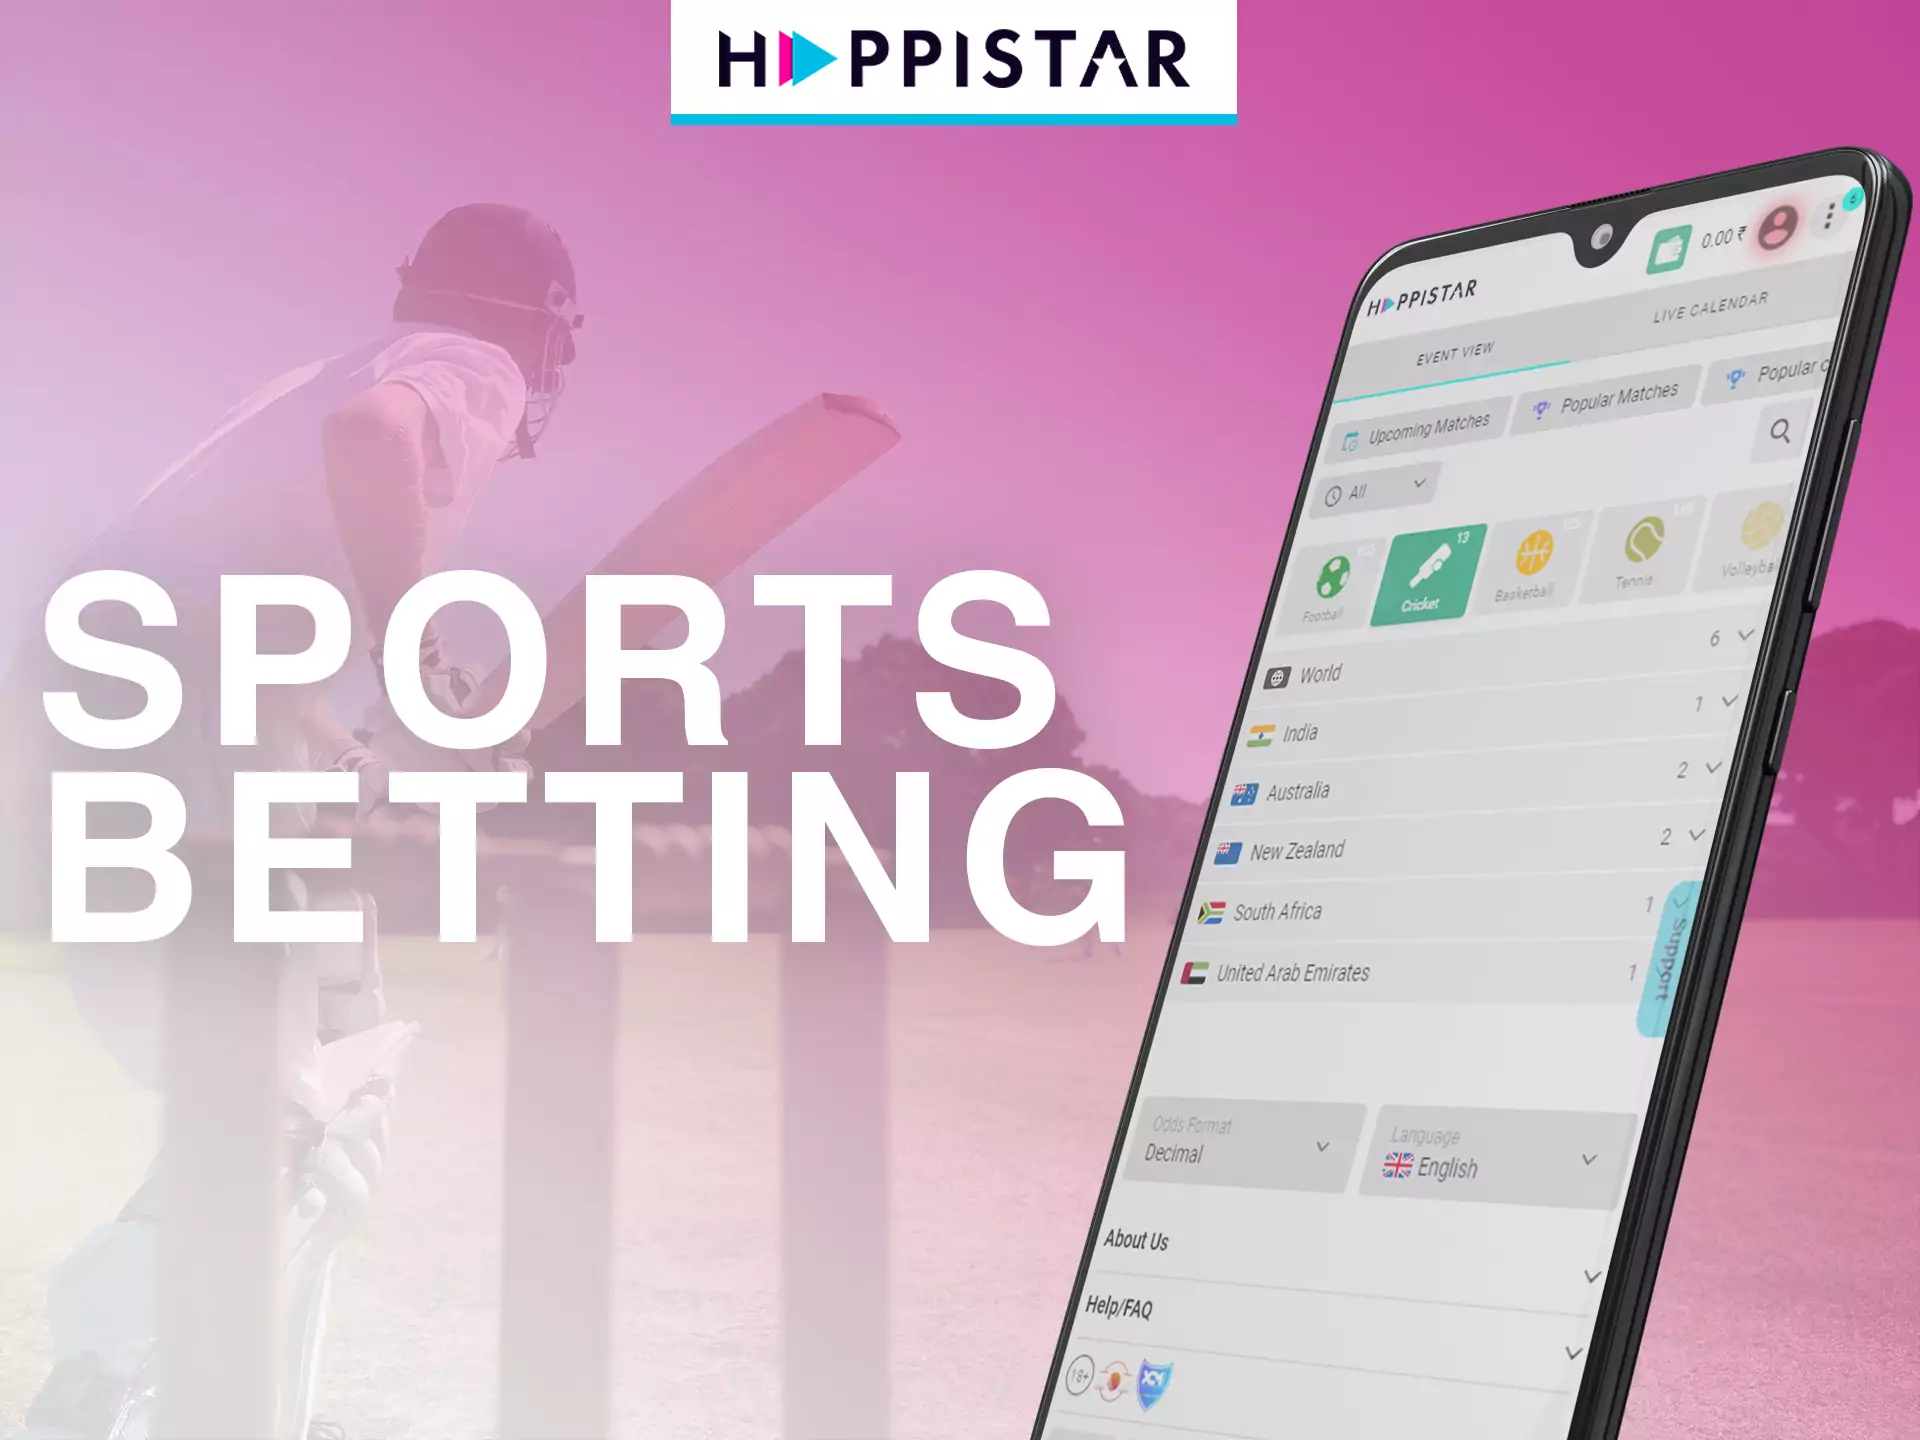 There is a big number of events in the Happistar sports list.